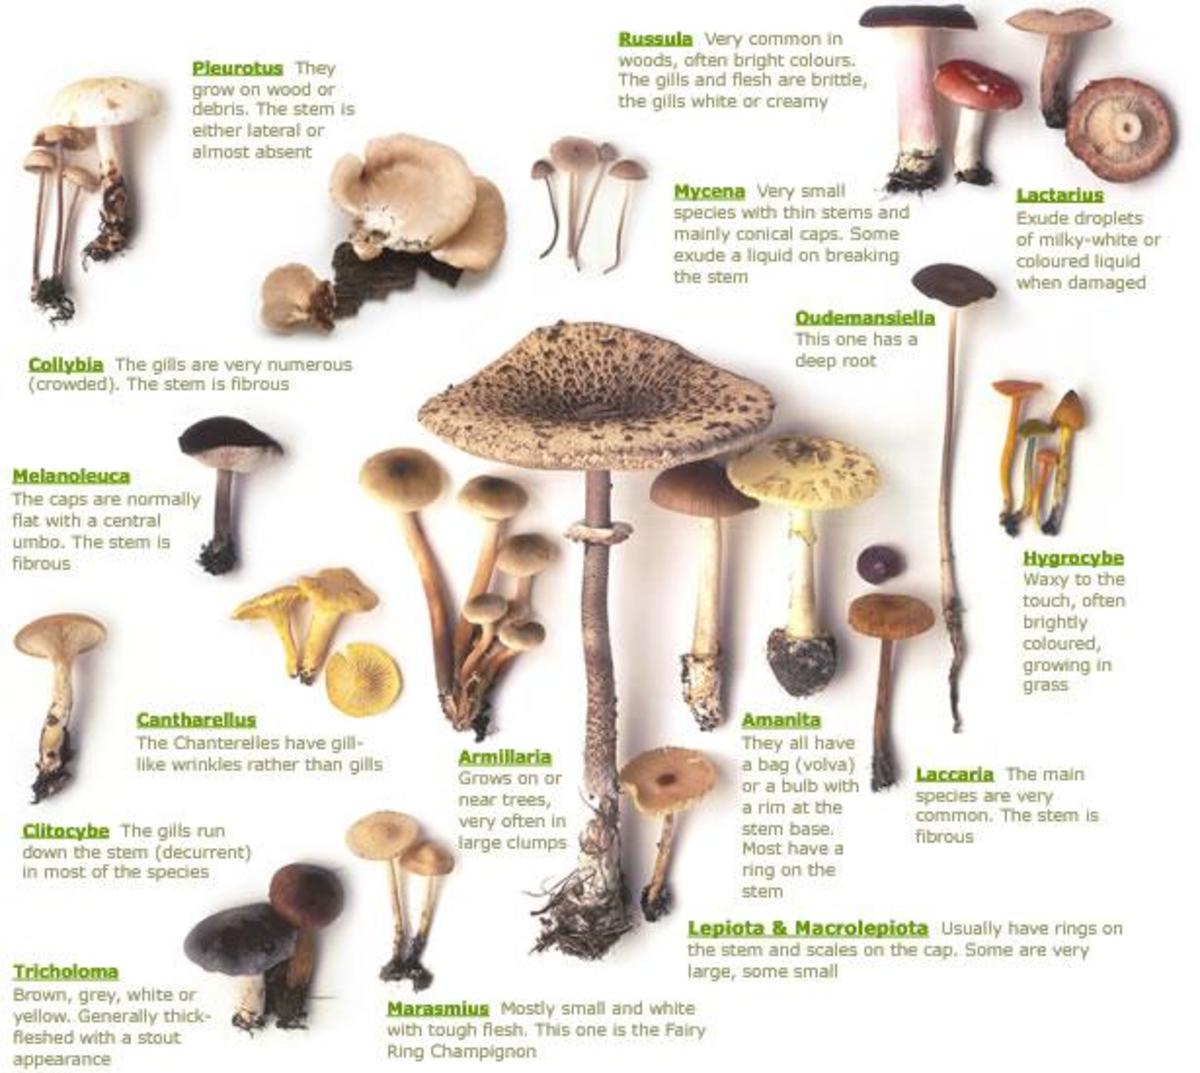 Types Of Poisonous Mushrooms With White Or Cream Spores: